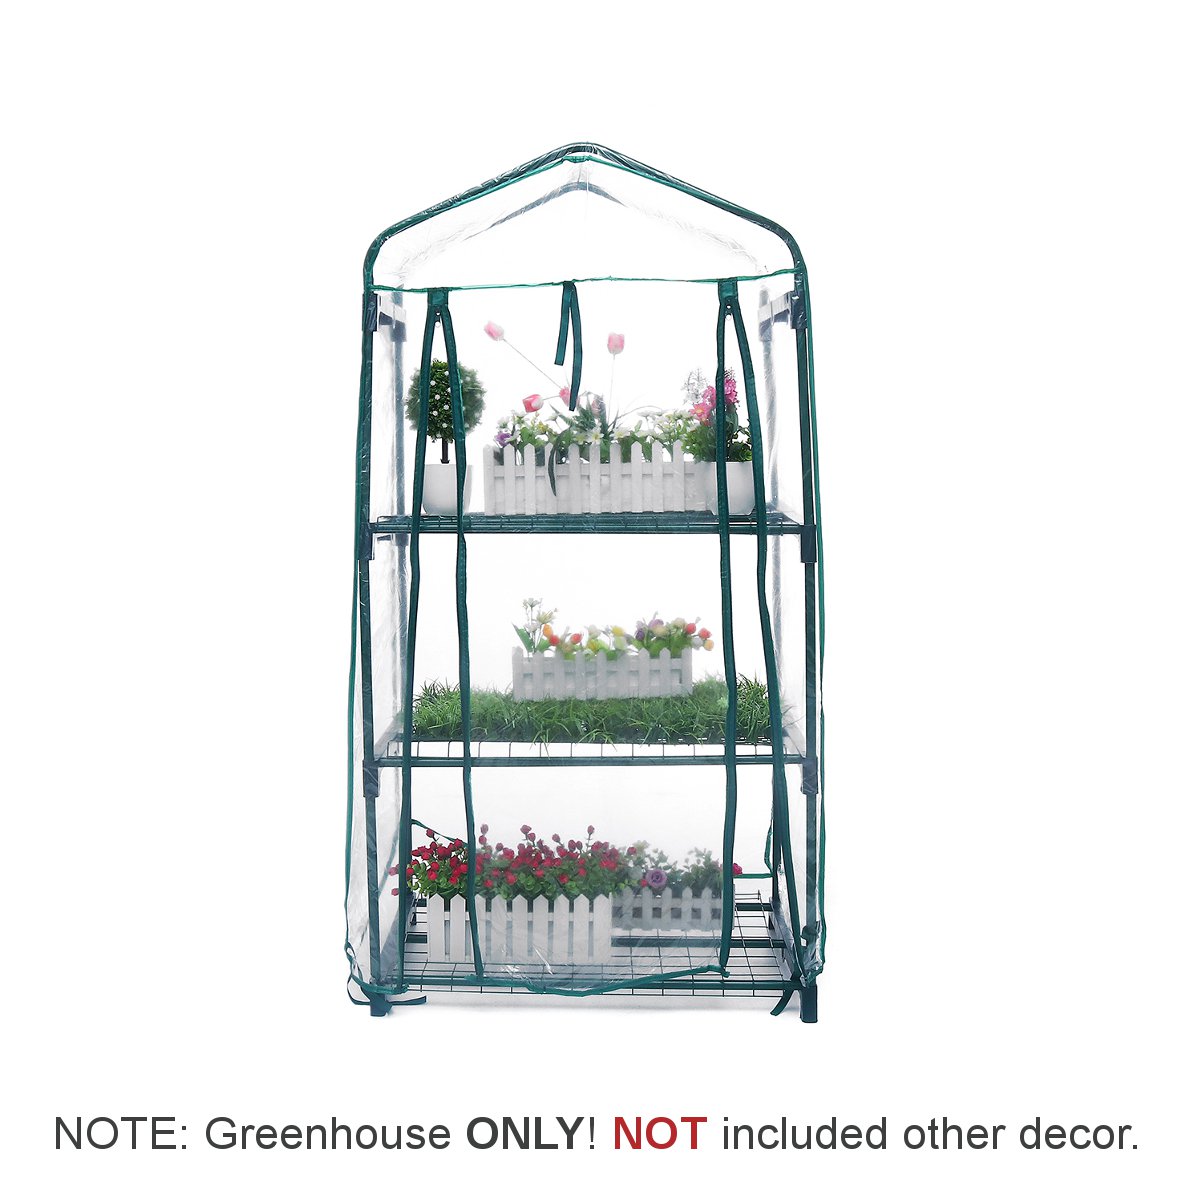 Mini-Greenhouse-AUEDW-3-Shelves-IndoorOutdoor-Greenhouse-with-Zippered-Cover-and-Metal-Shelves-for-G-1592630-3